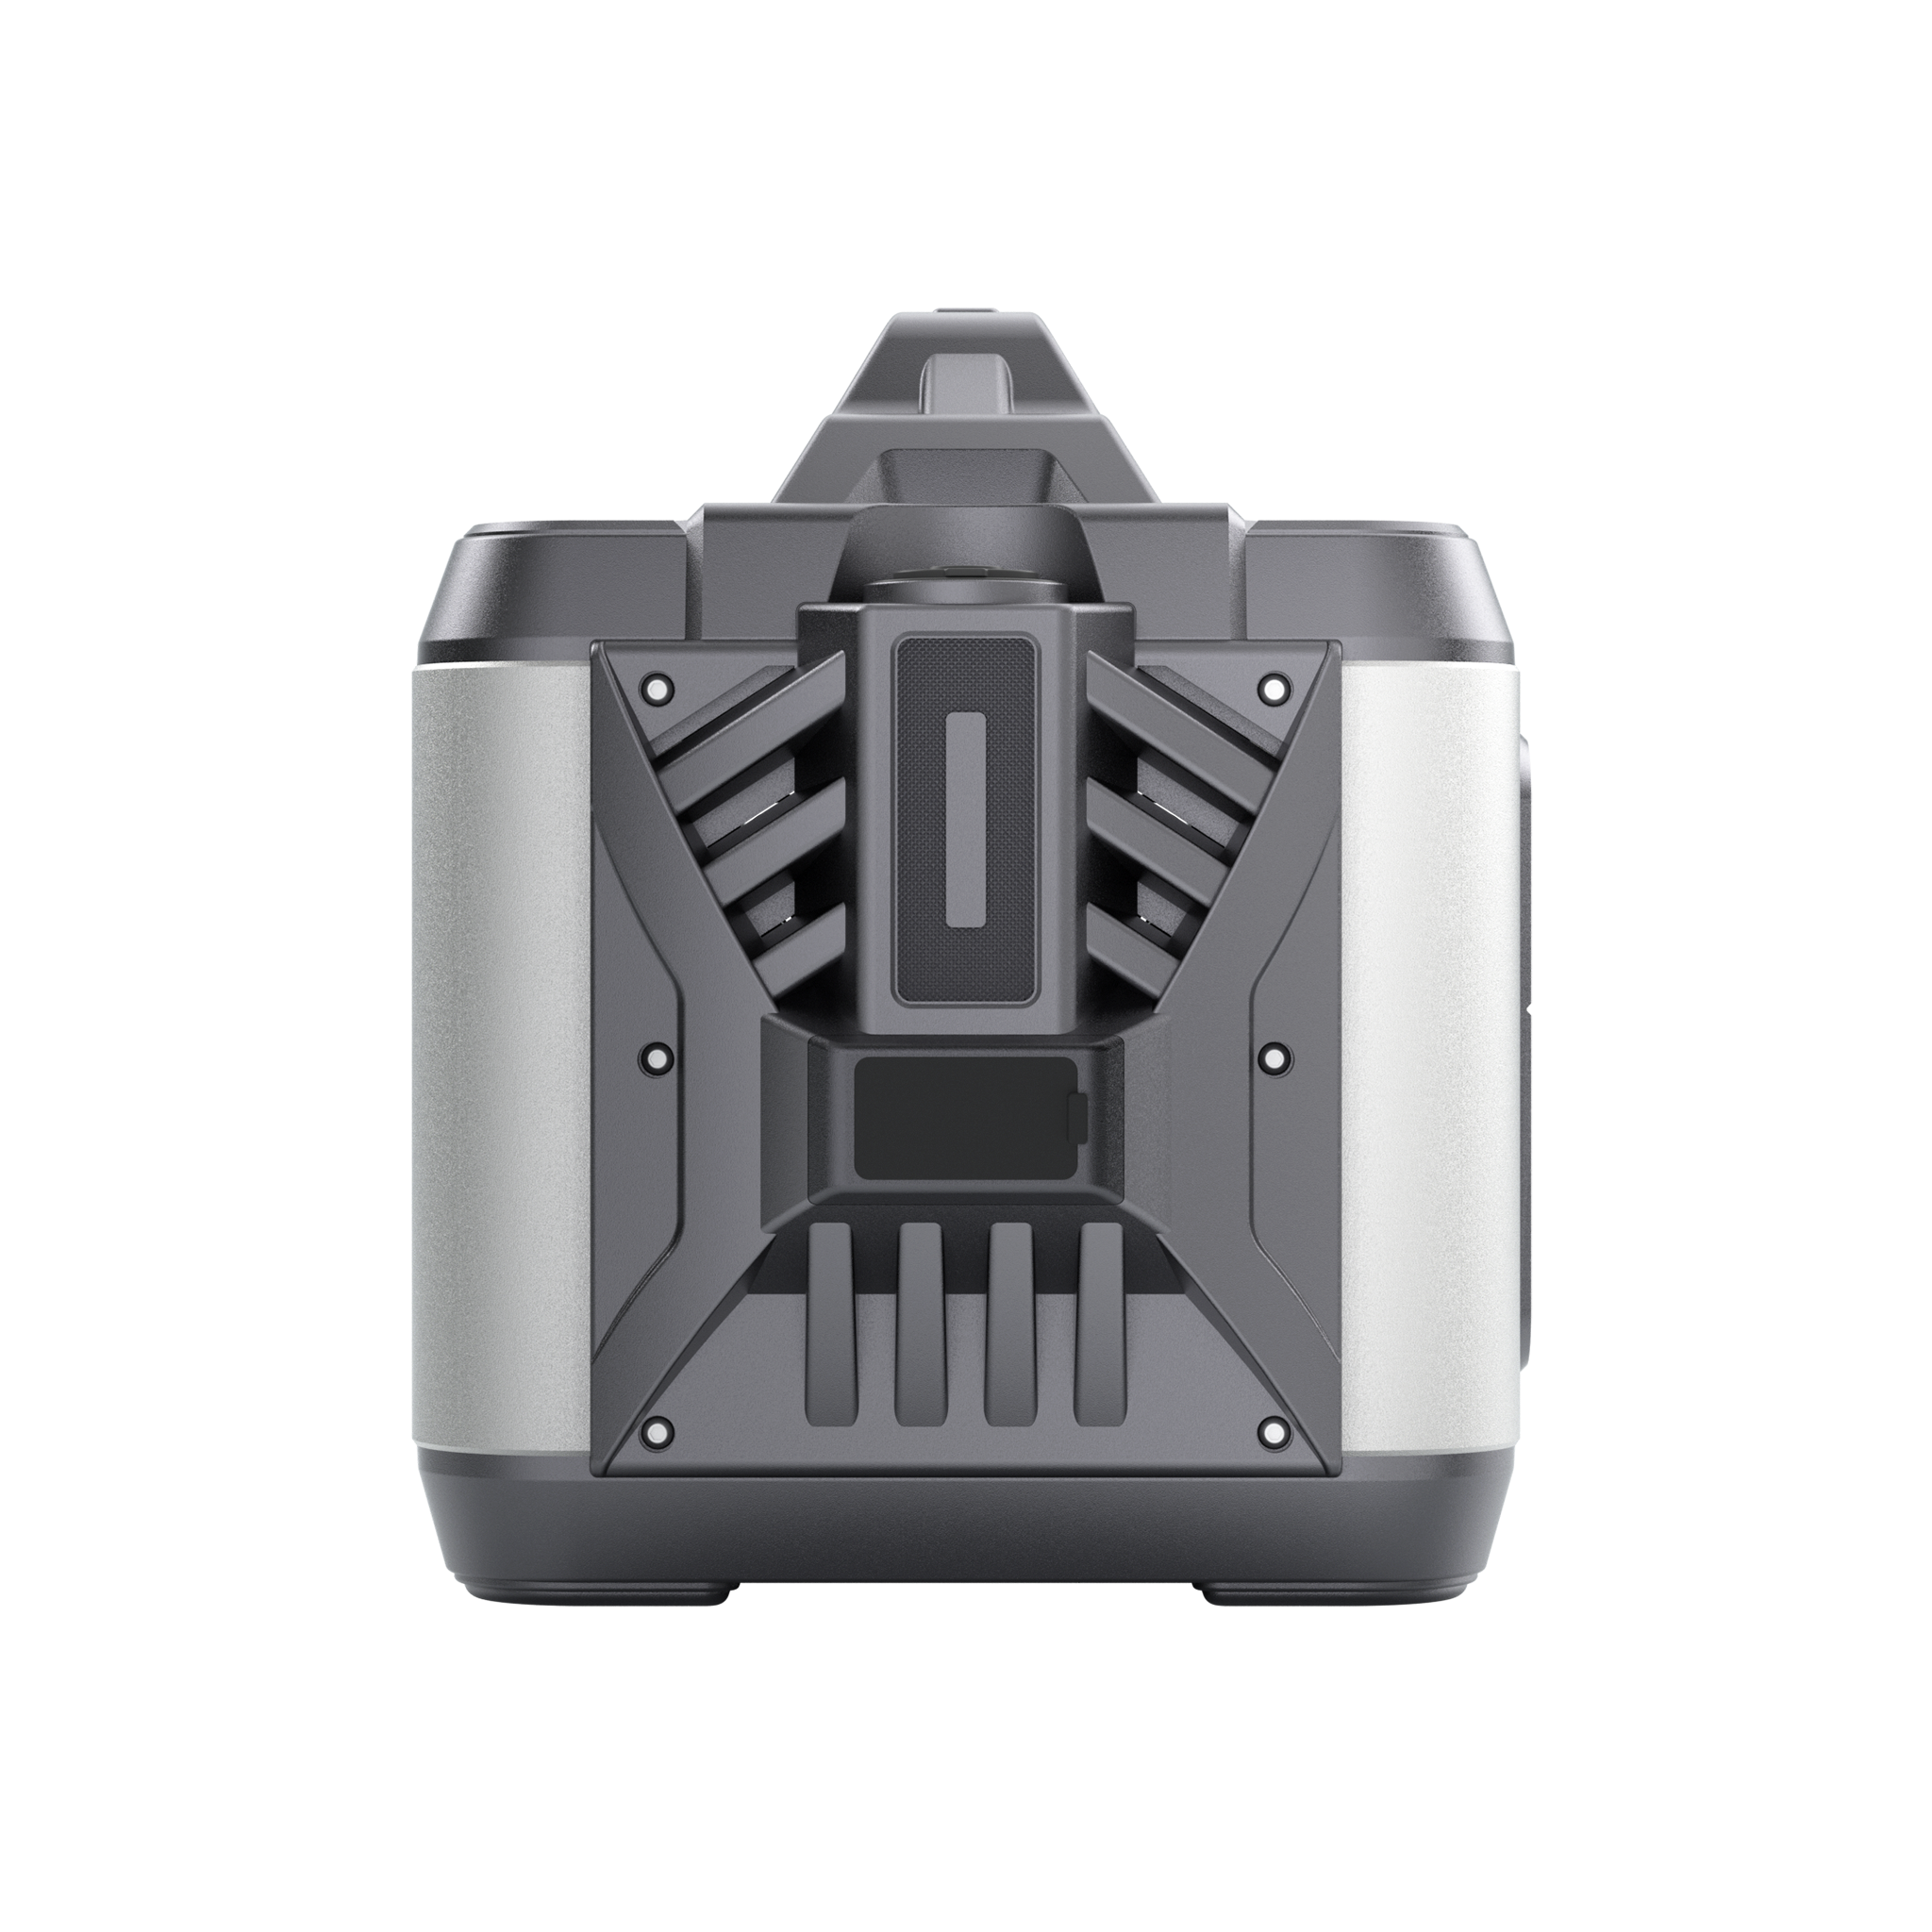 POWEREPUBLIC T1200 portable power station, 1200W 1110Wh, metallic gray aluminum-alloy body with aircraft wing design, a car charger, an Anderson port, and a handle.